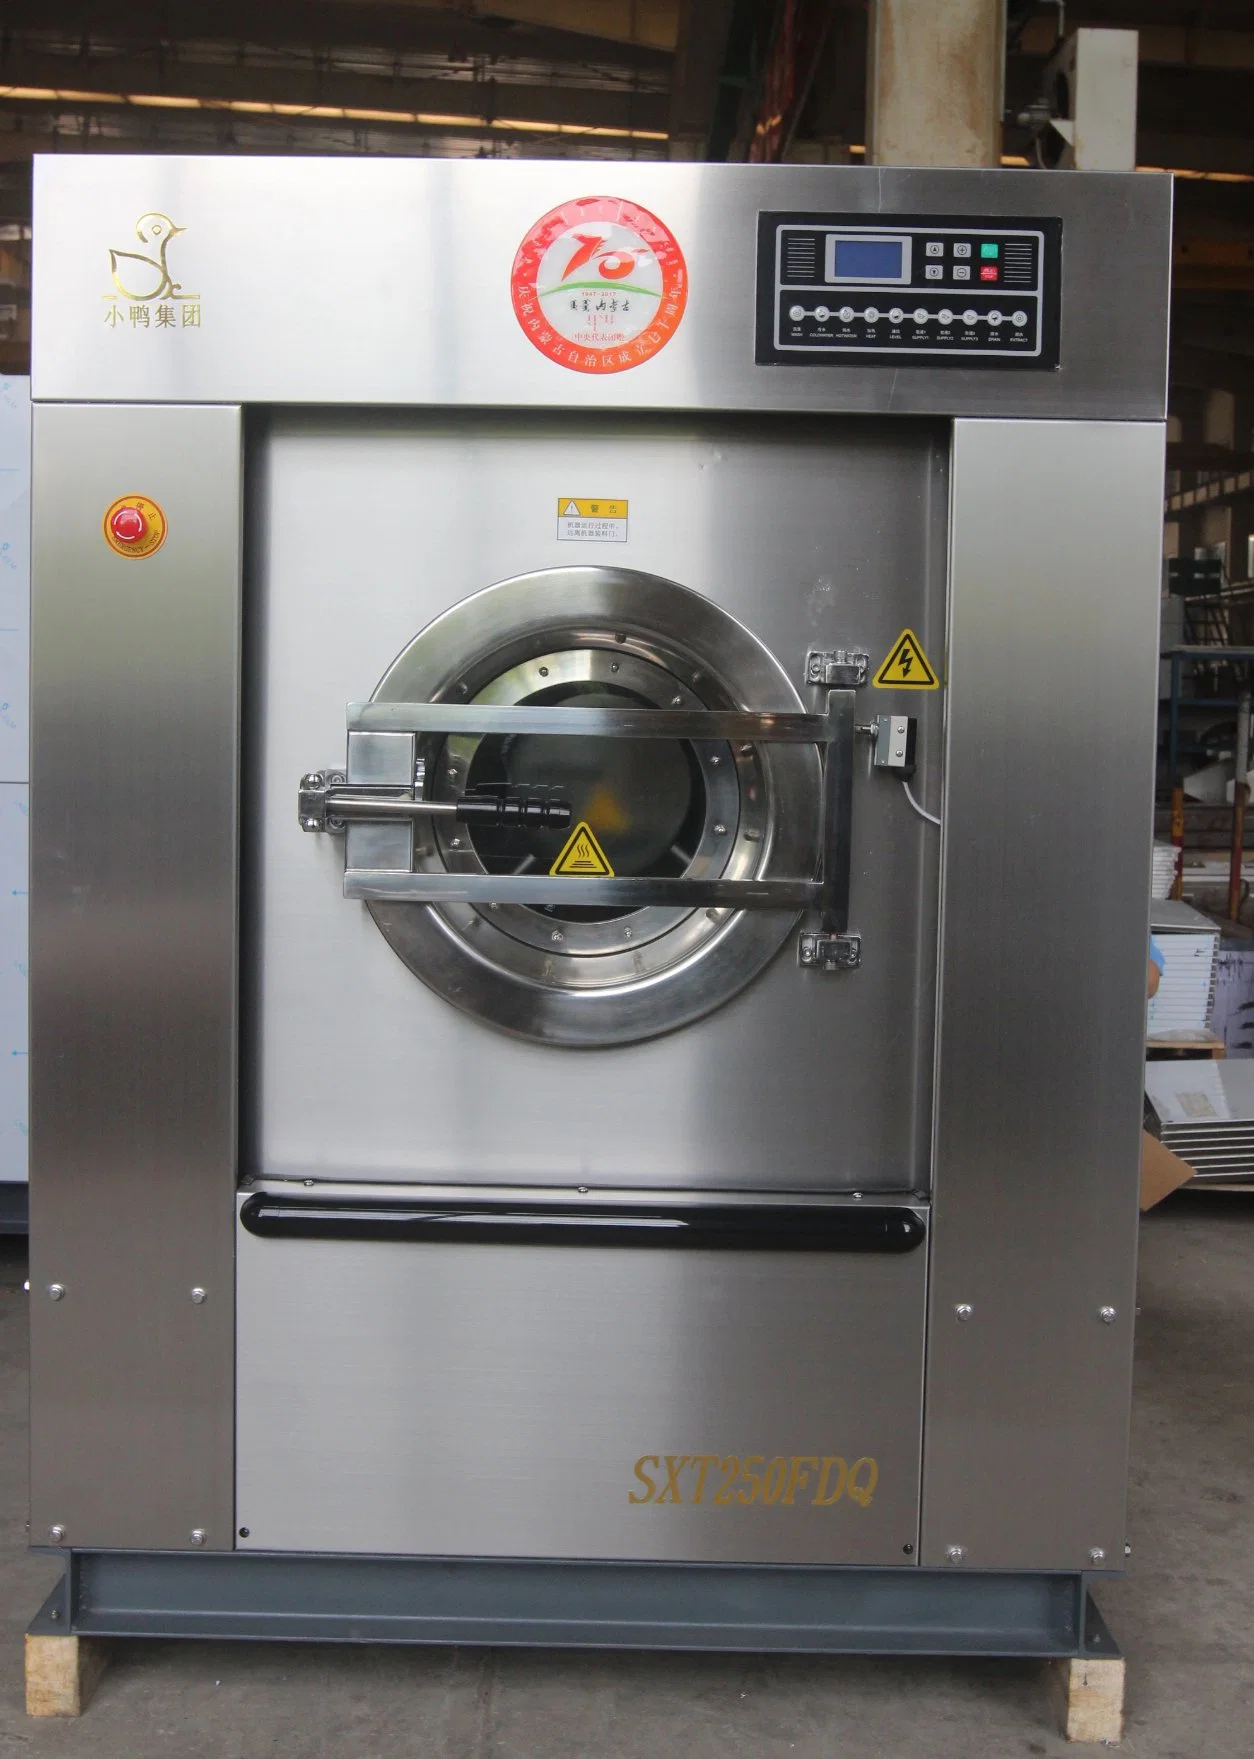 15kg Full Automatic Industry Washing and Extracting Machine Commercial Laundry Washer Extractor Cleaning Equipment for Hotel Laundry Shop H